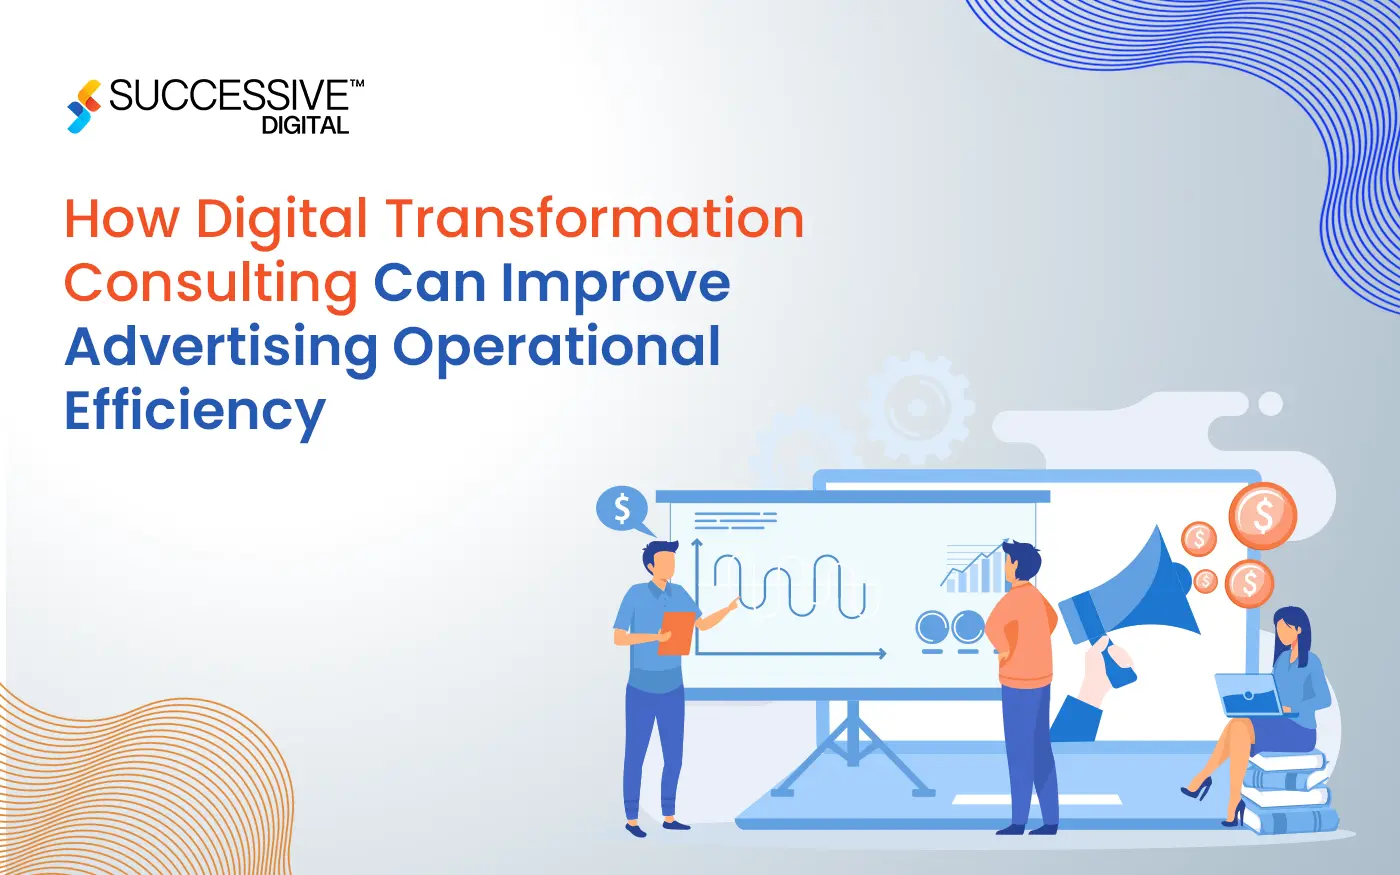 How Digital Transformation Consulting Can Improve Advertising Operational Efficiency